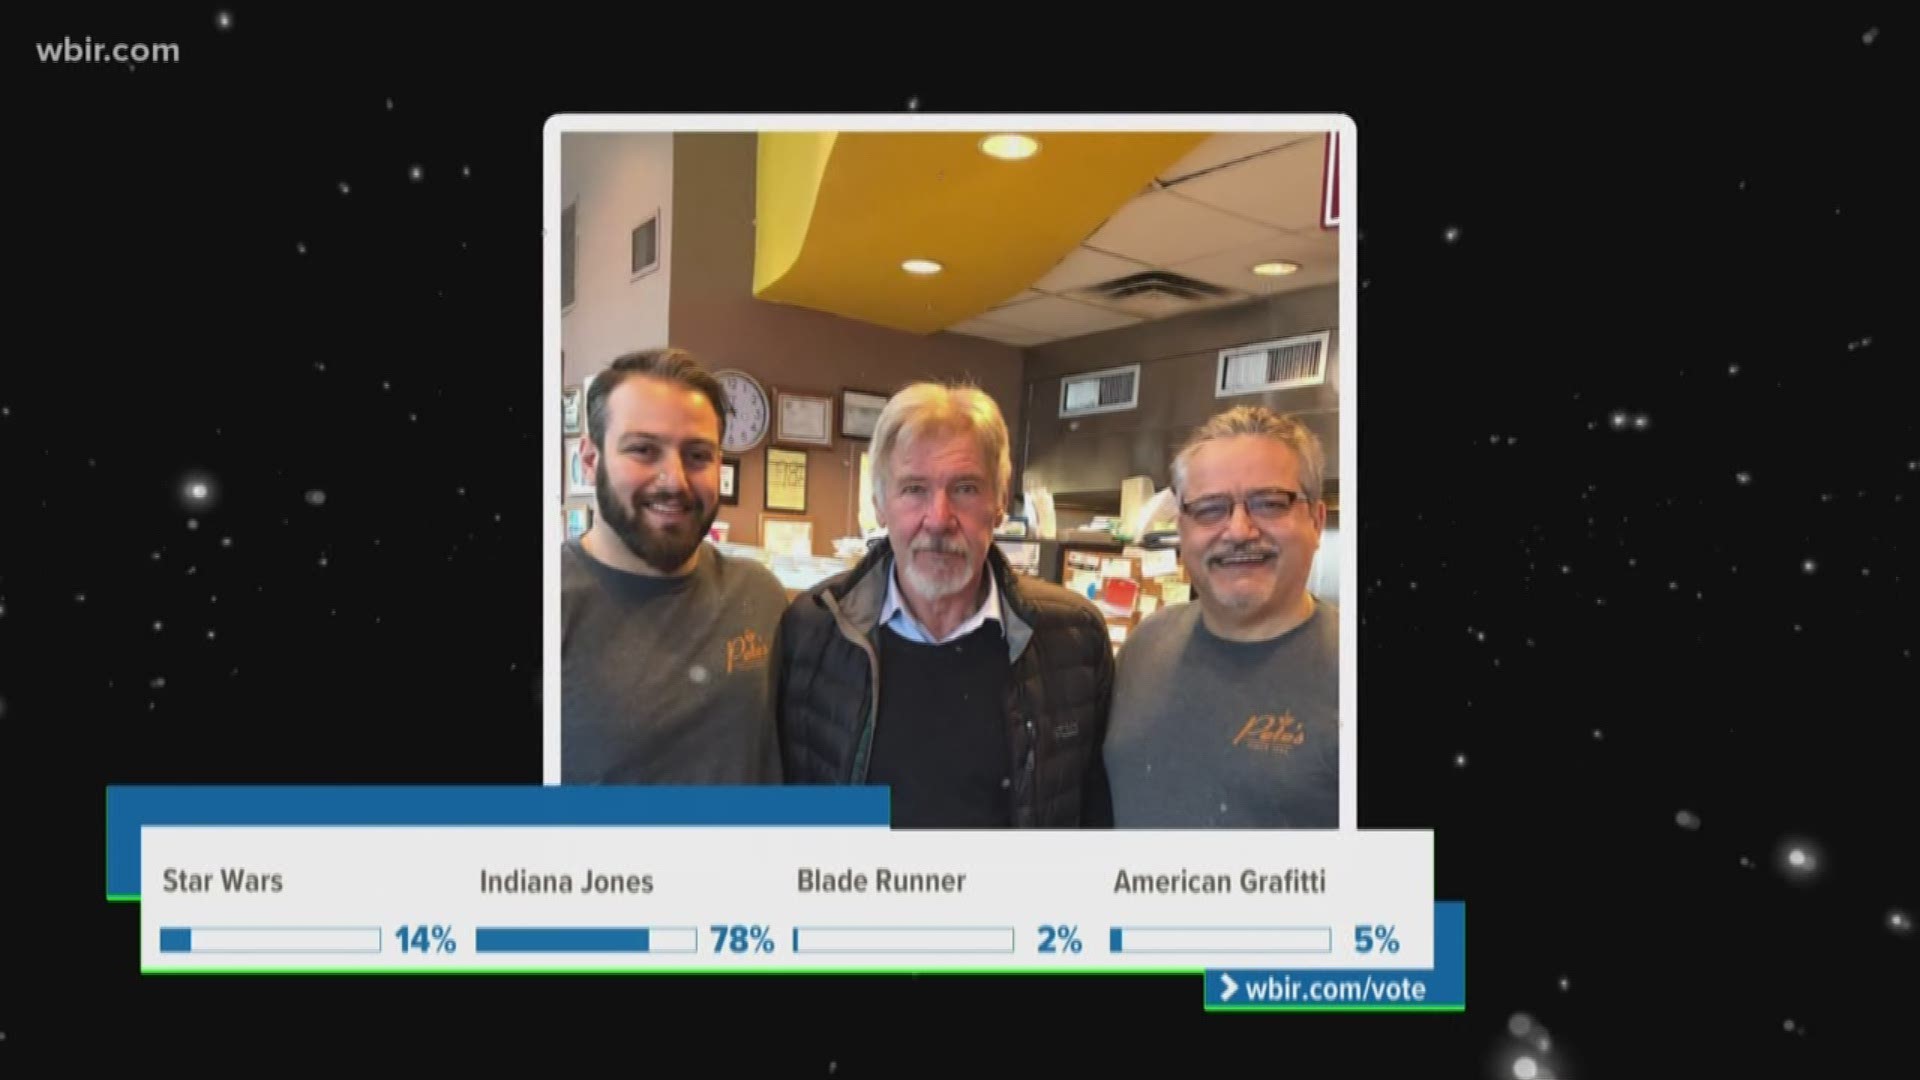 Jan. 3, 2018: Harrison Ford created a big buzz when he stopped into Pete's Coffee Shop in downtown Knoxville.